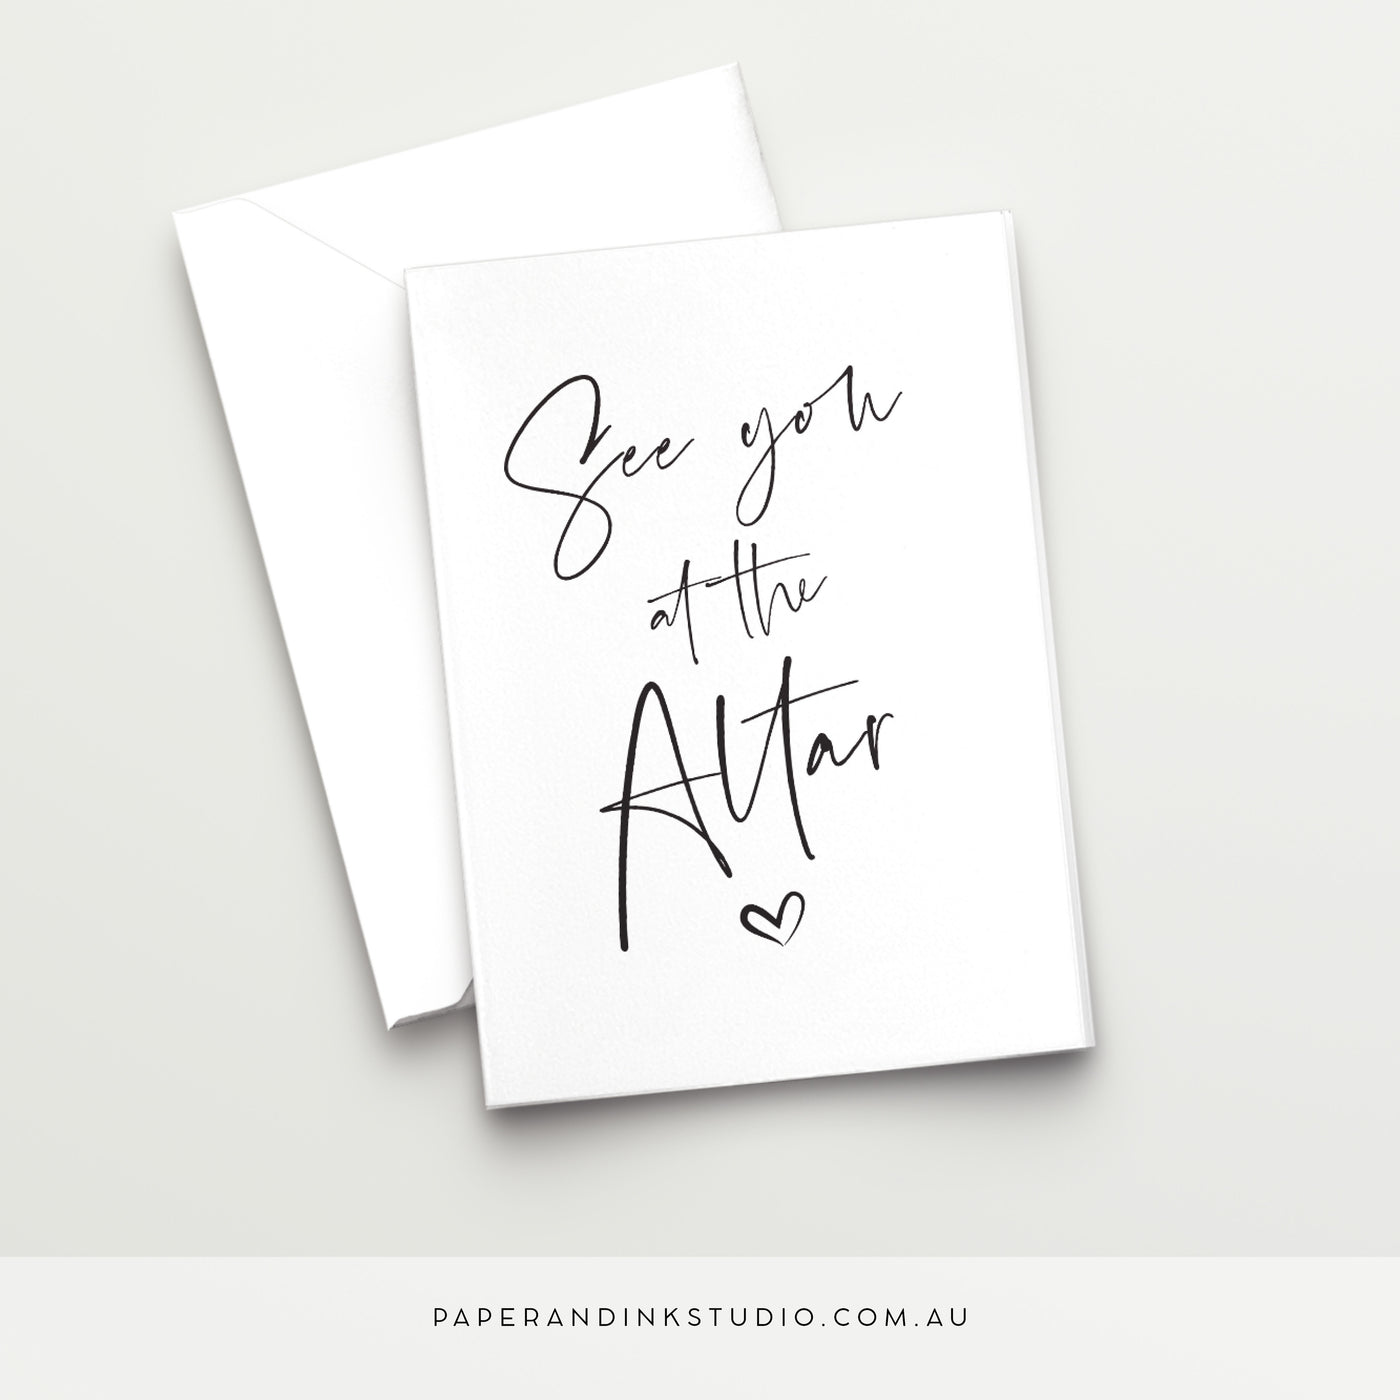 A white folded wedding card in a design called Thorne with black writing that says See You at the Altar with a love heart below it, in a beautiful handwritten font, to give to the bride or groom as a wedding card on their wedding day.